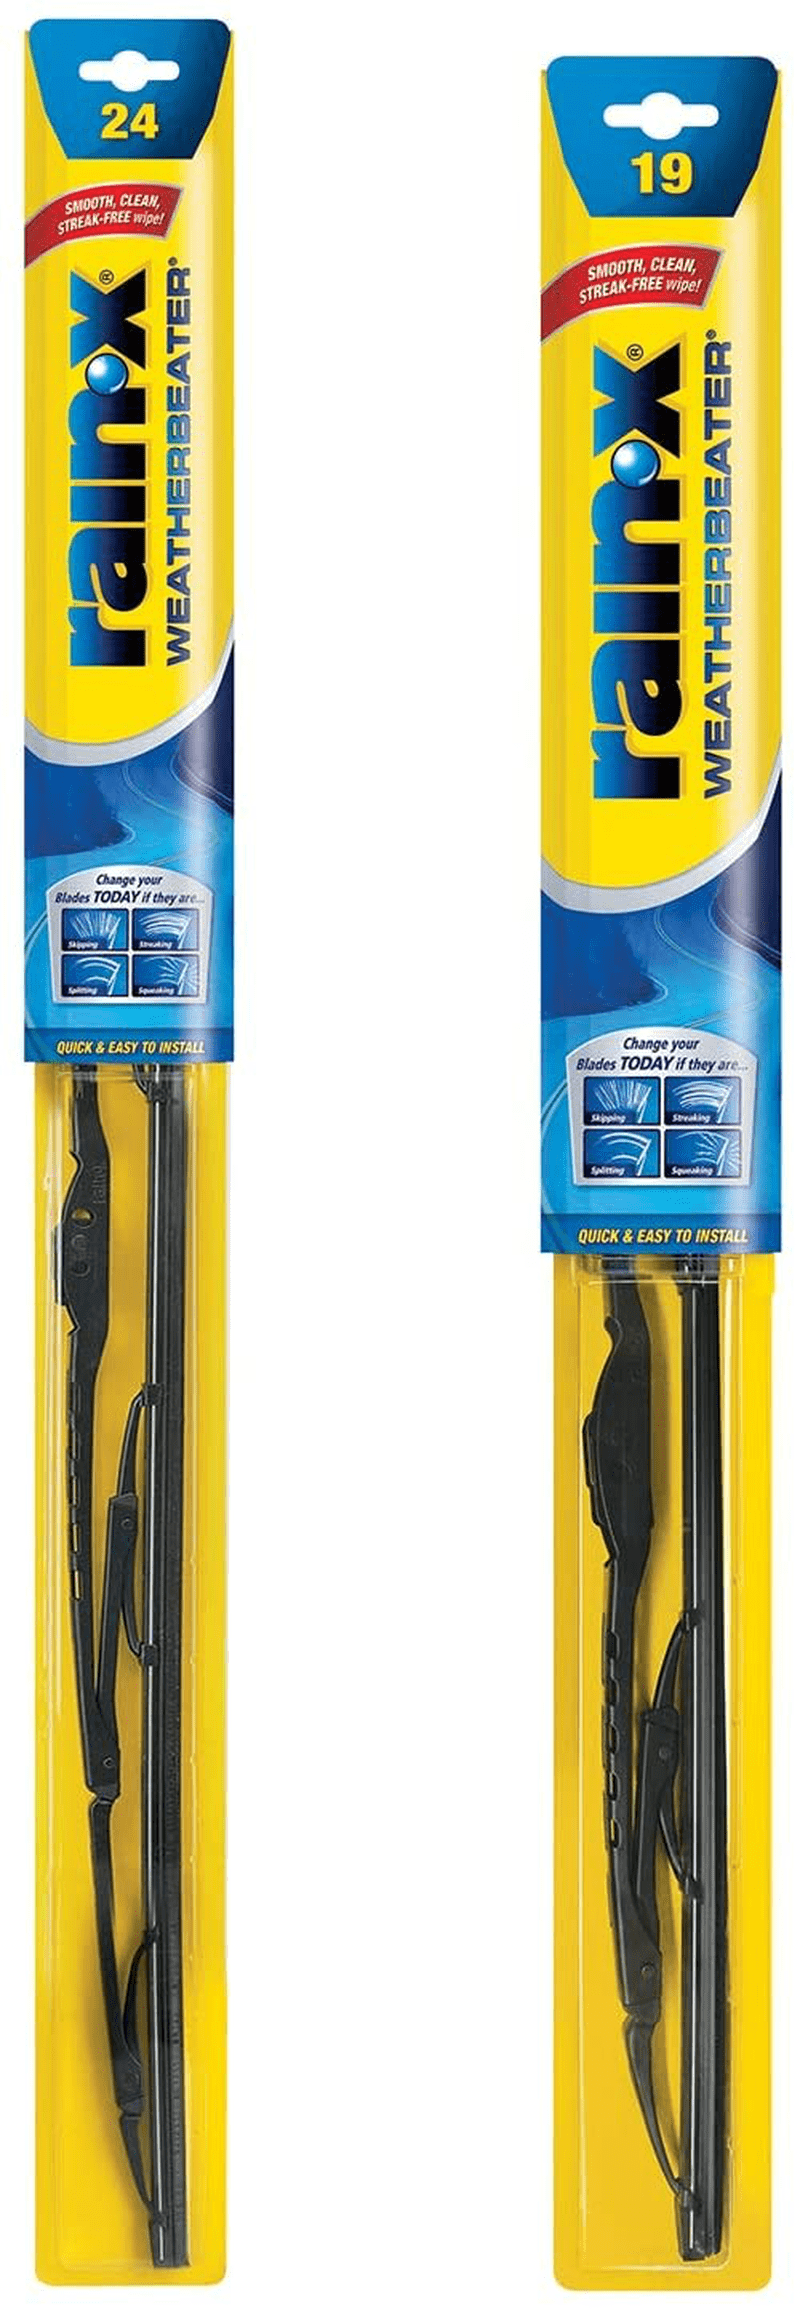 Rain-X RX30218 Weatherbeater Wiper Blade - 18-Inches - (Pack of 1) Vehicles & Parts > Vehicle Parts & Accessories > Motor Vehicle Parts Rain-X 2-pack 24 / 19 in combo 